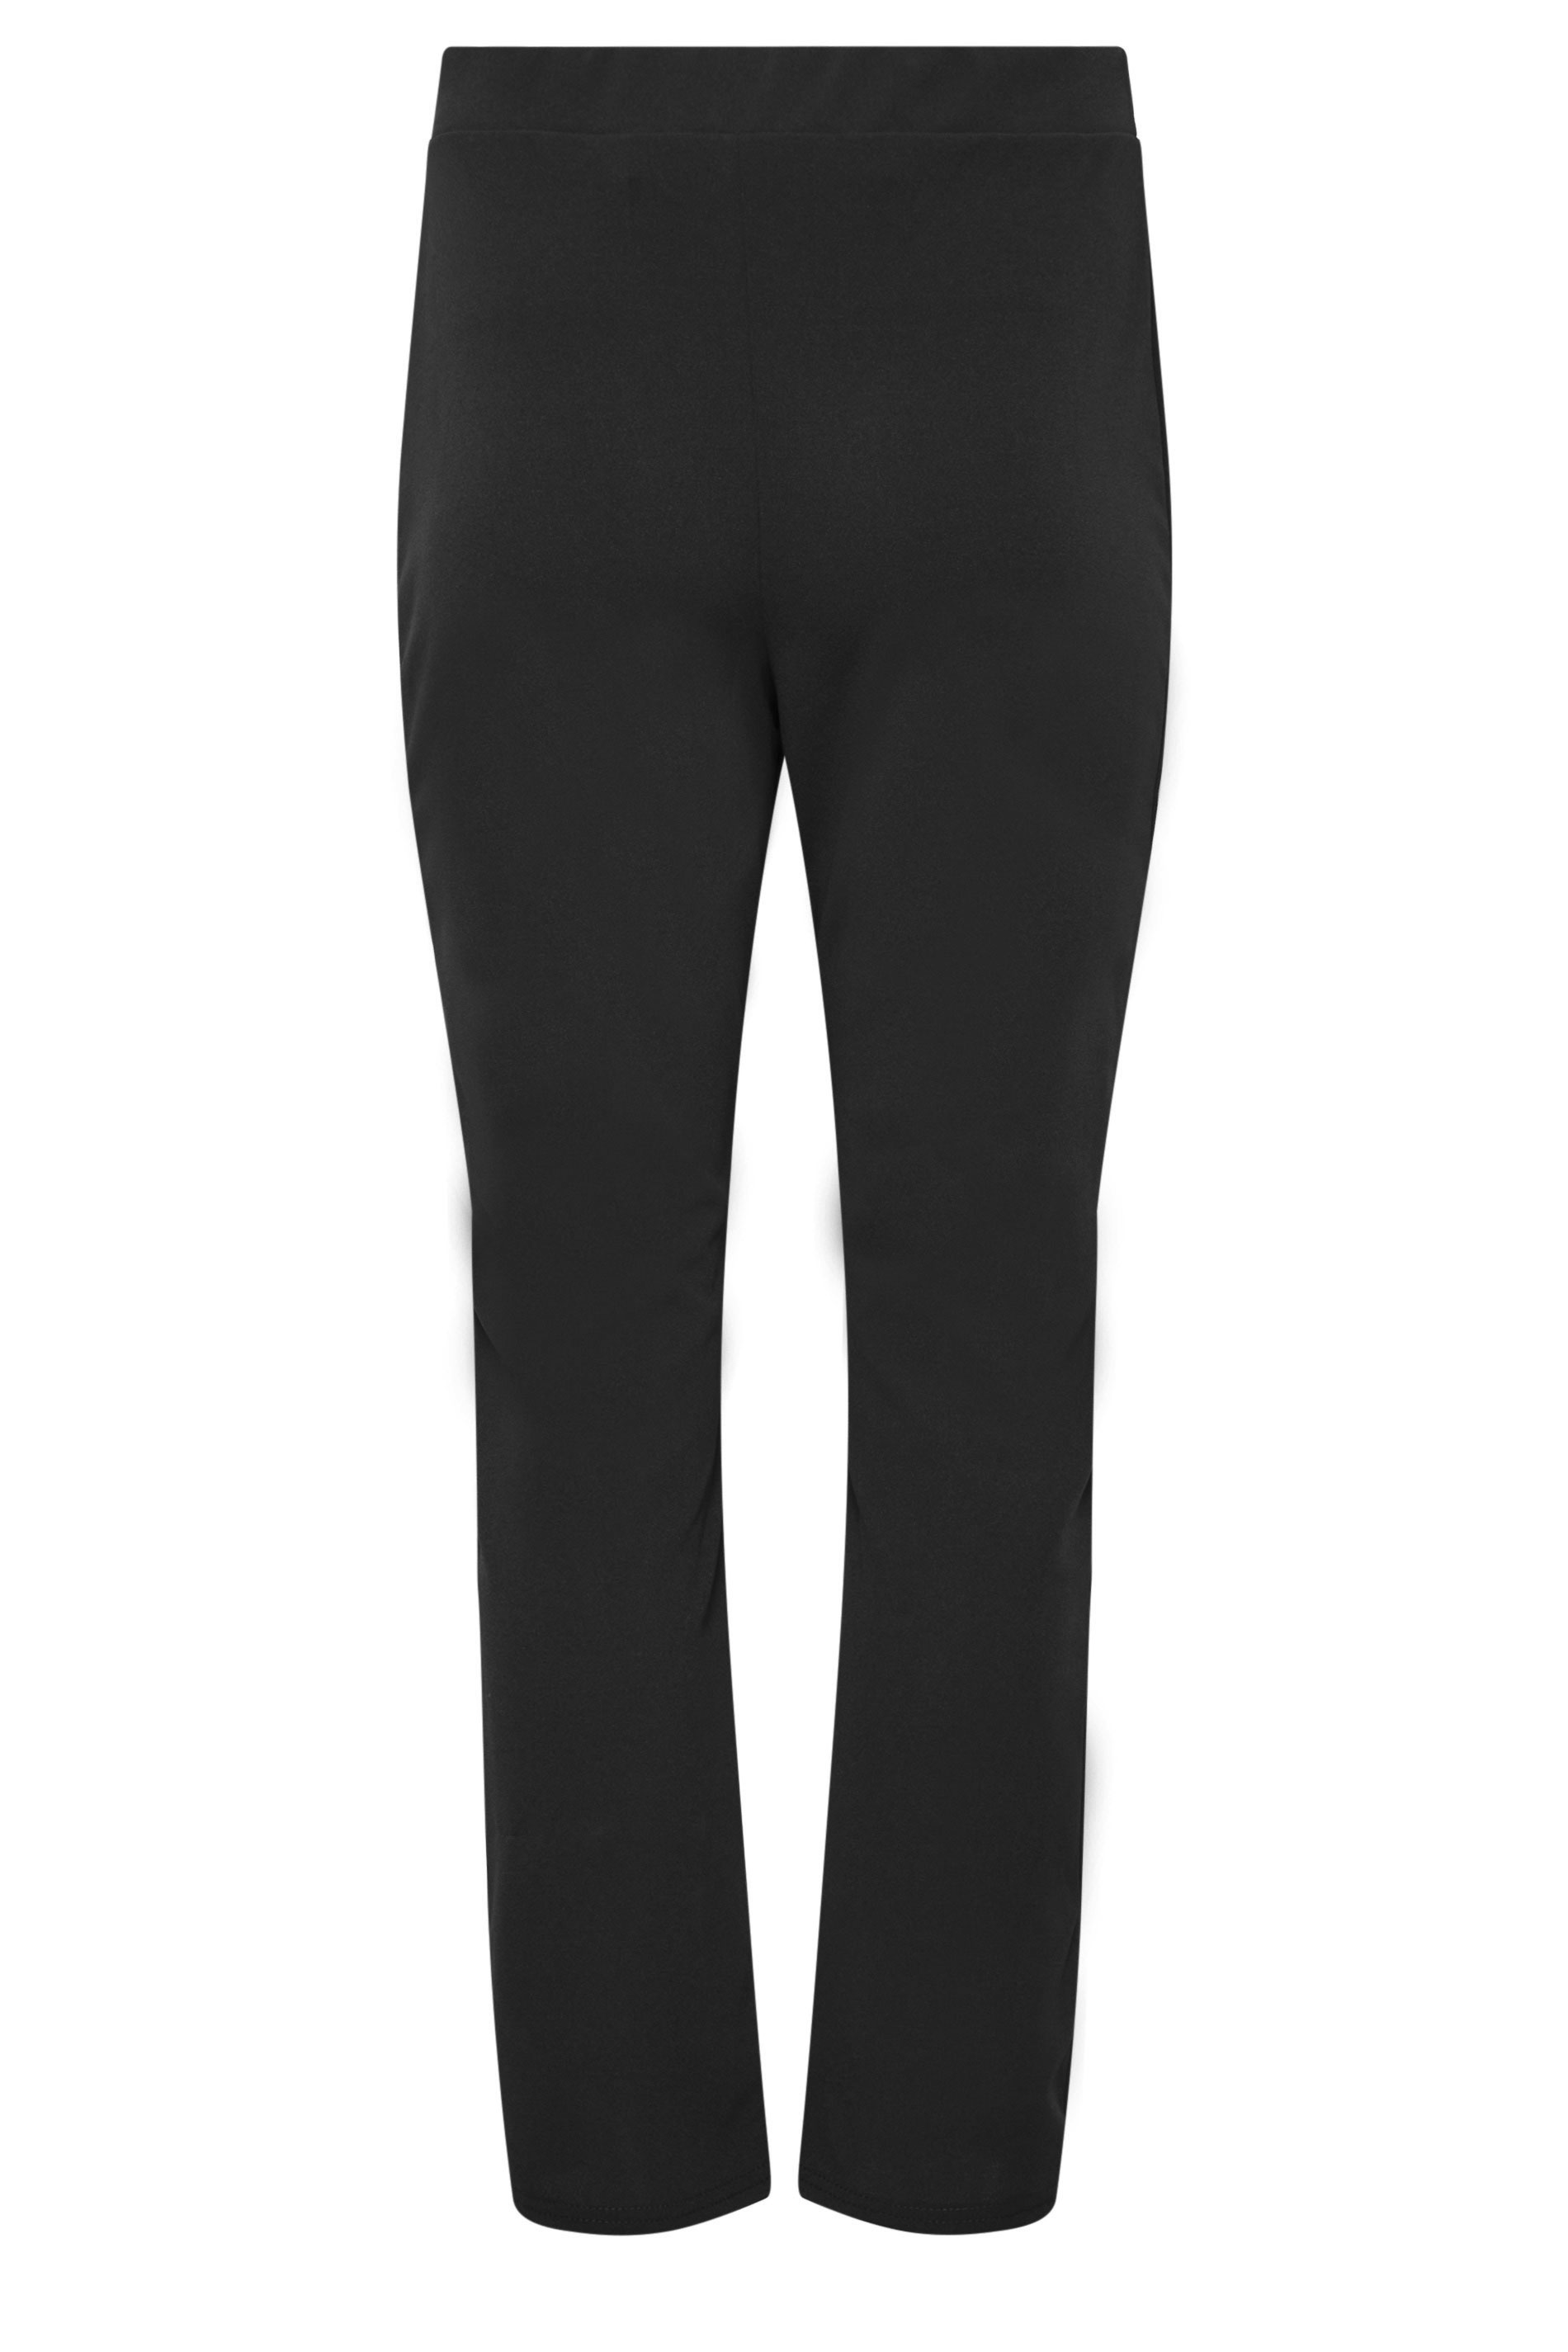 M&Co Black Stretch Tapered Trousers